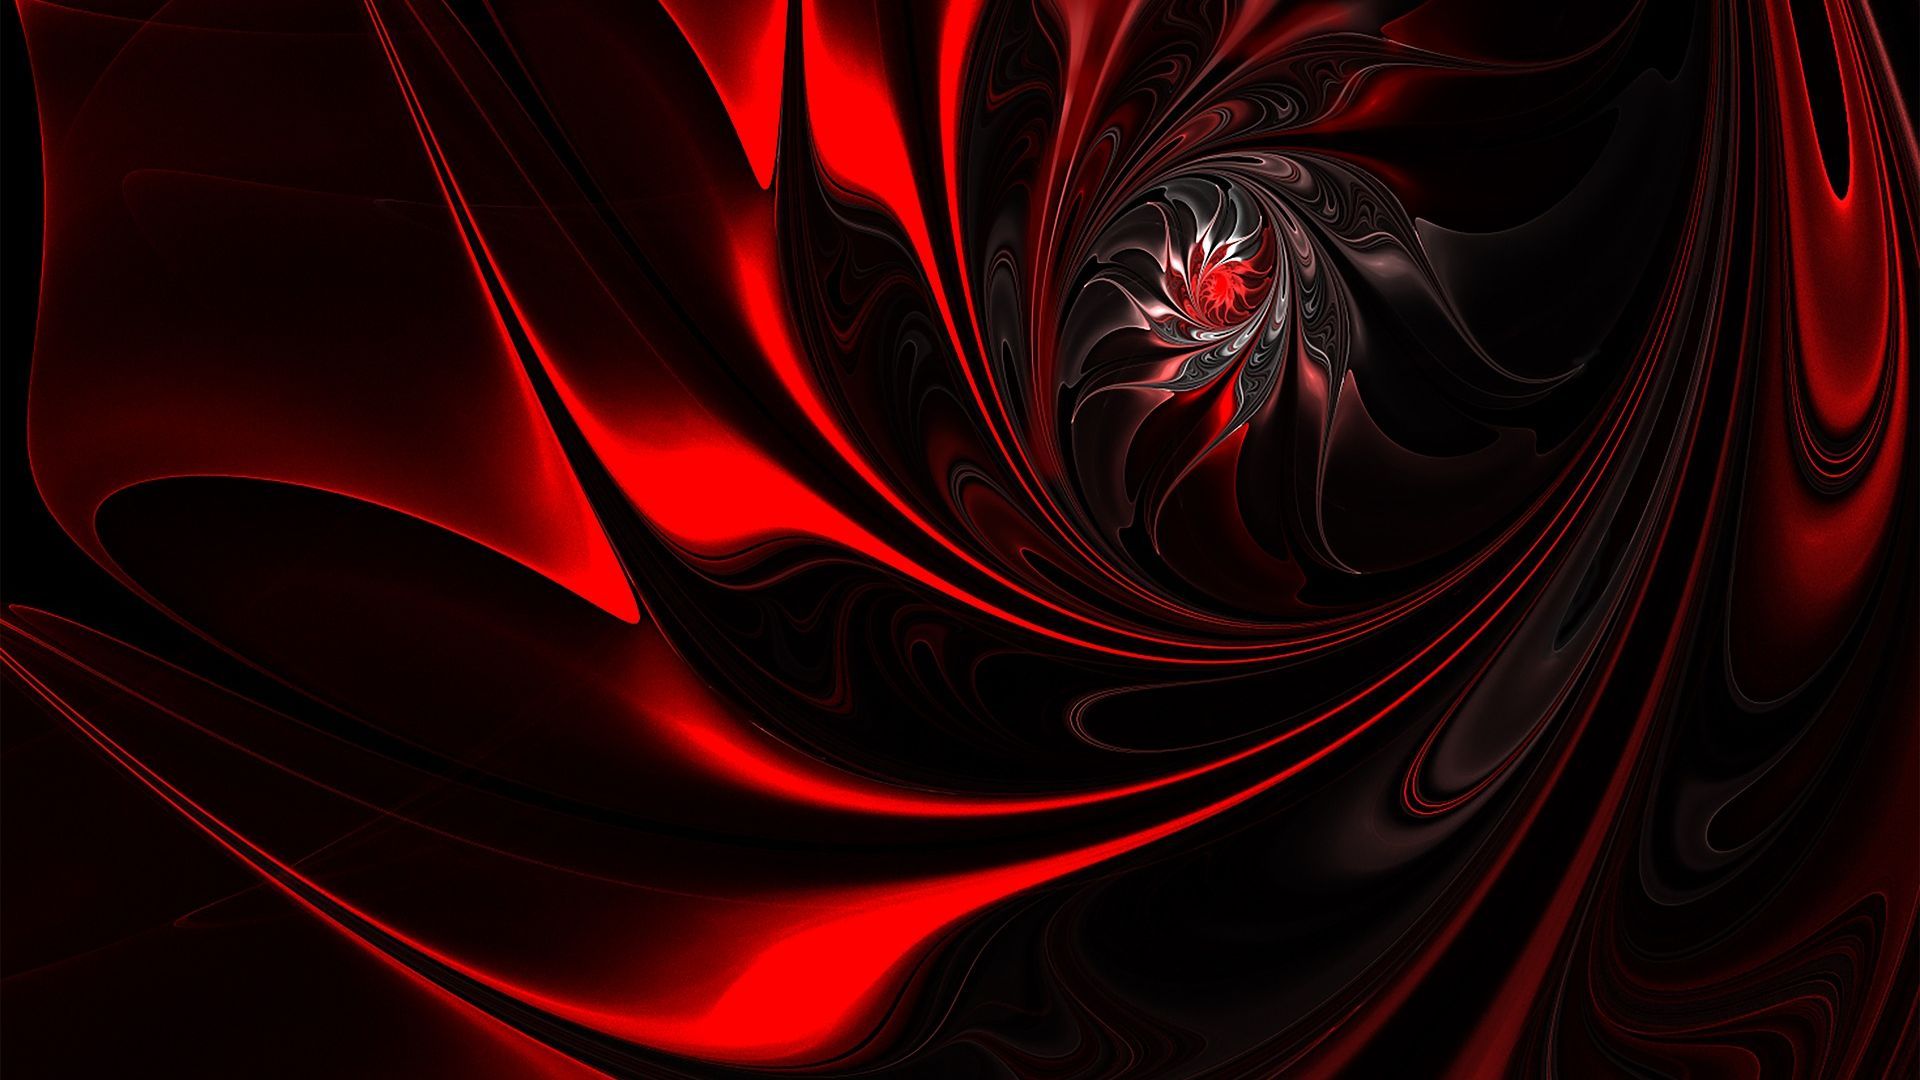 Abstract Red Dark Flame Pattern Wallpaper